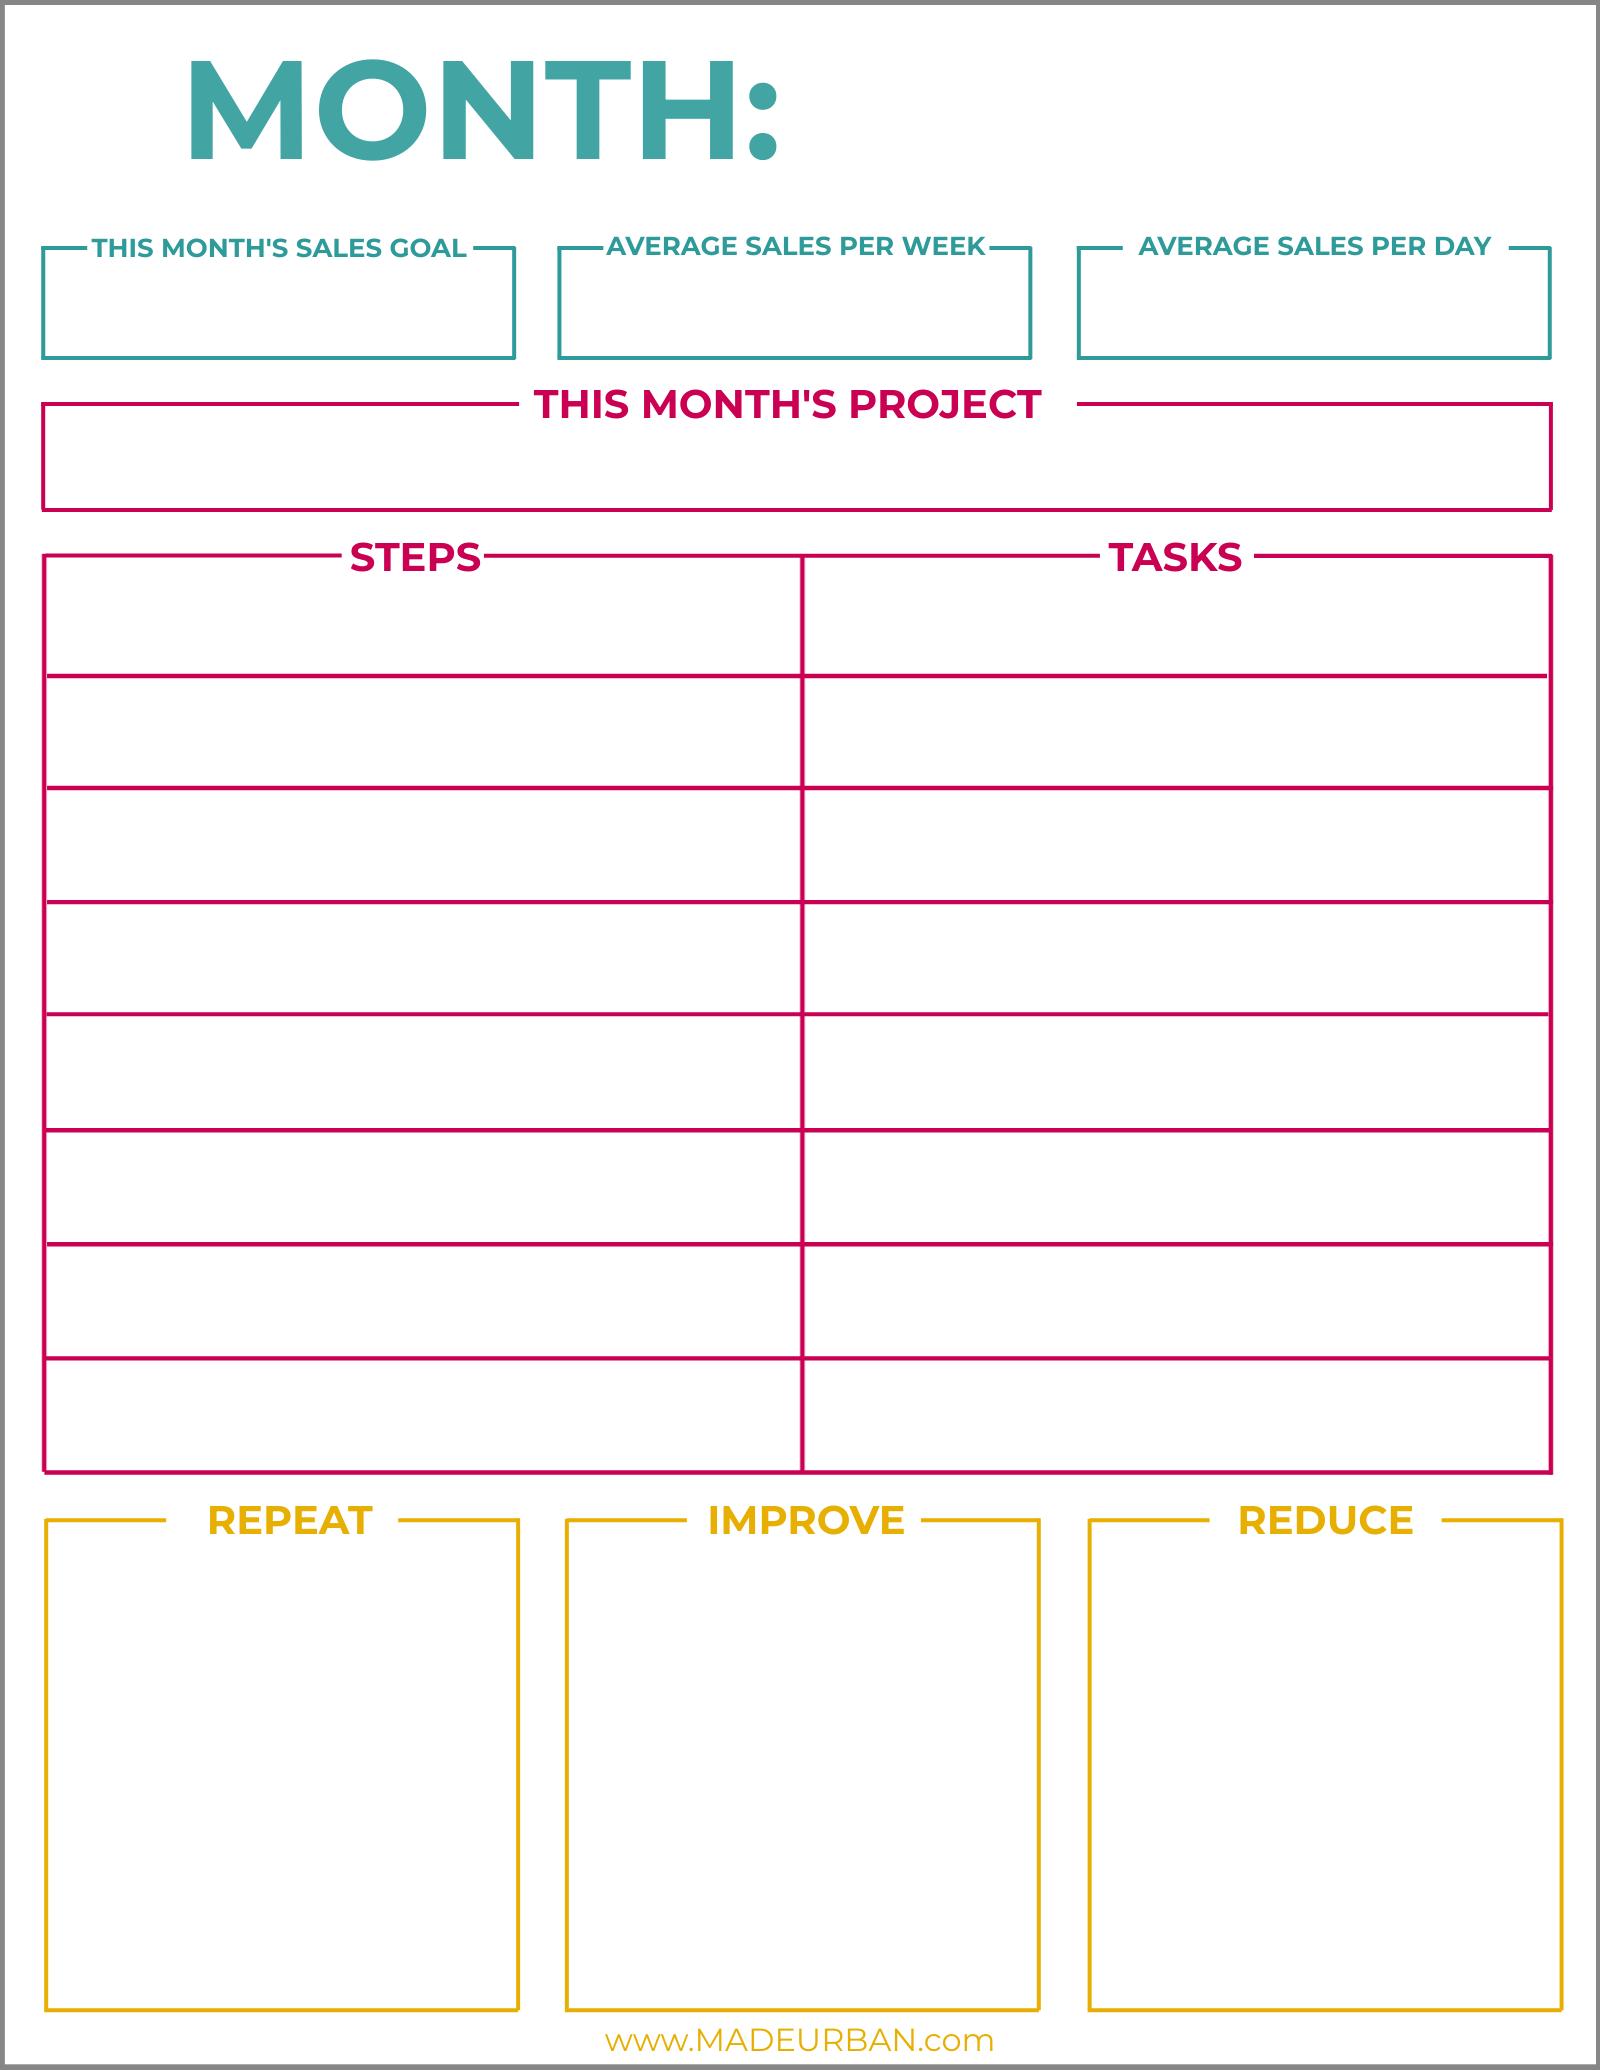 Printable Monthly Checklist for a Craft Business